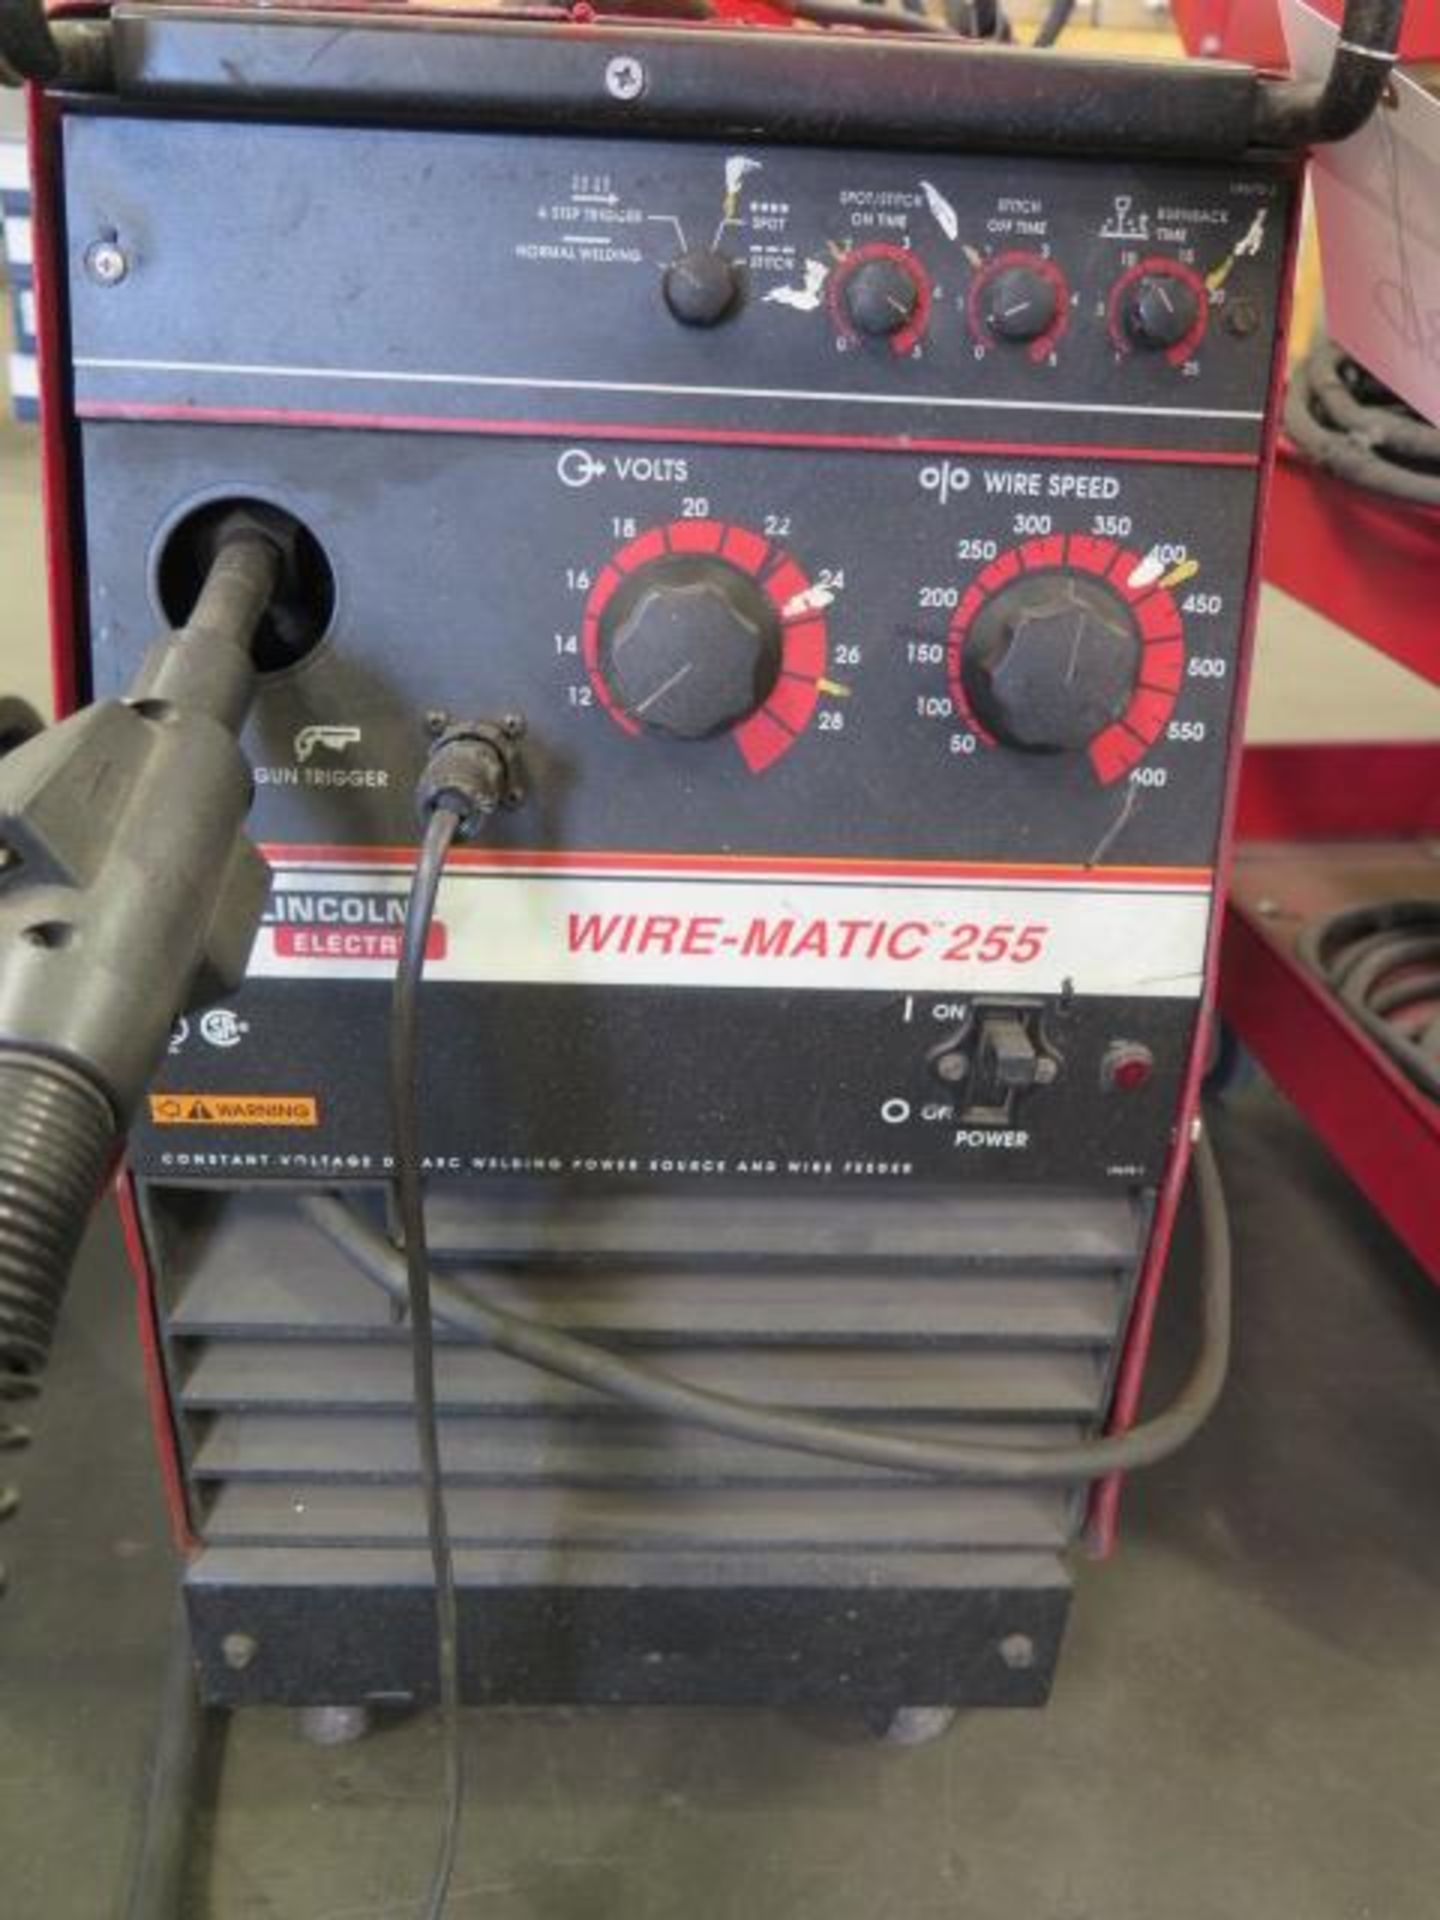 Lincoln Wire-Matic 255 Wire Welder s/n U1980912855 (SOLD AS-IS - NO WARRANTY) - Image 3 of 8